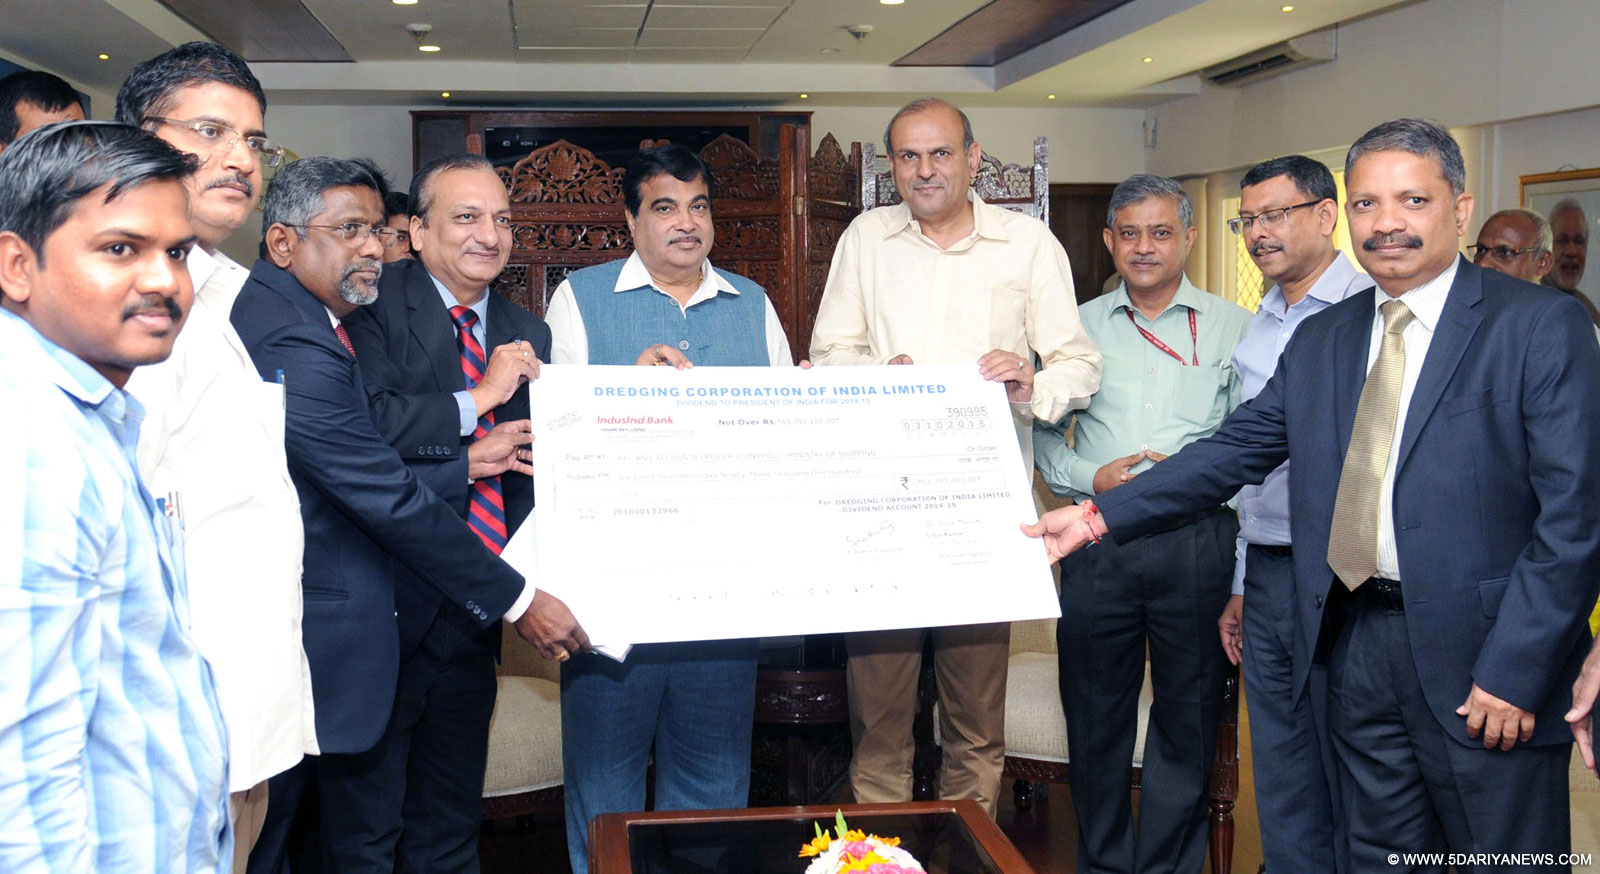 The CMD, Dredging Corporation of India Ltd., Shri Rajesh Tripathi presenting a dividend cheque to the Union Minister for Road Transport & Highways and Shipping, Shri Nitin Gadkari, in New Delhi on September 30, 2015. The Secretary, Ministry of Shipping, Shri Rajive Kumar is also seen